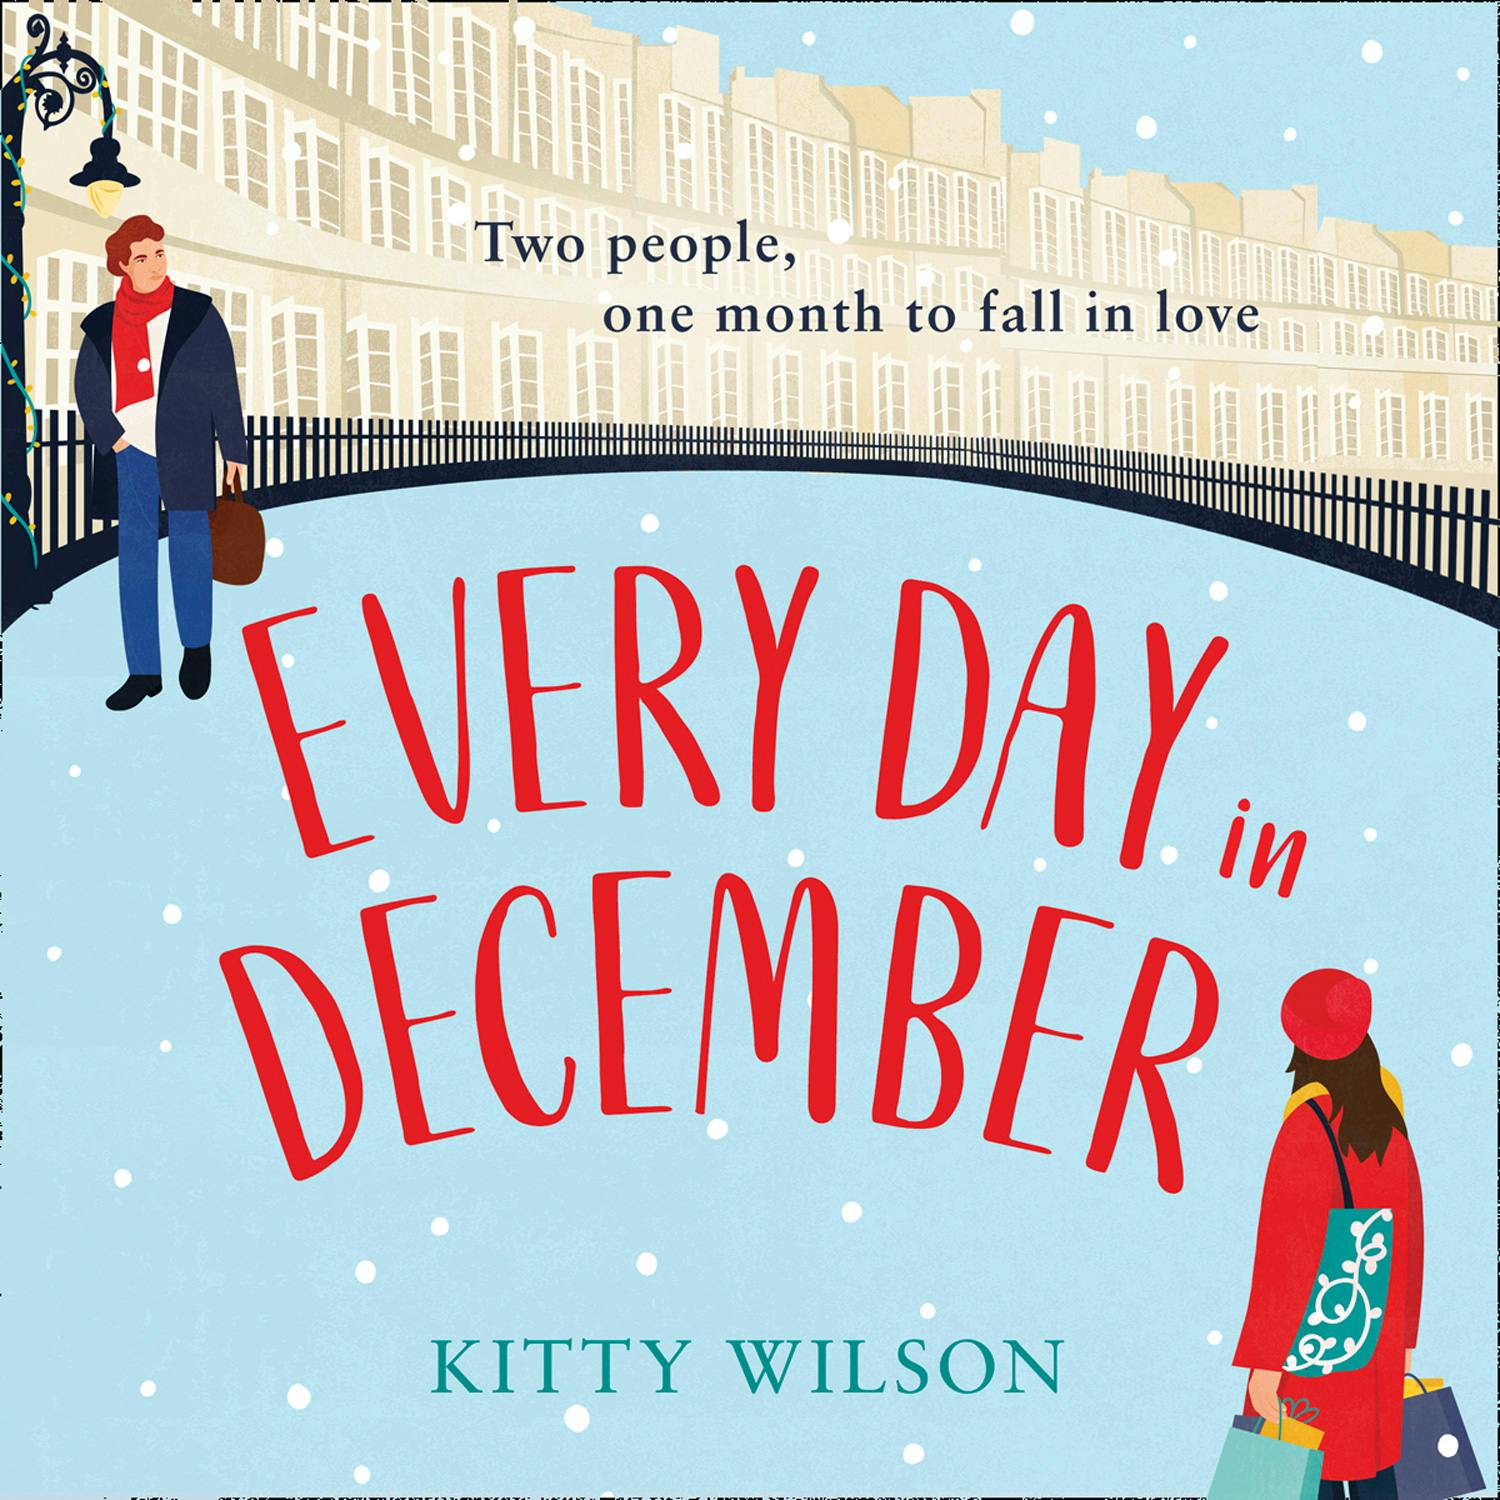 Every Day in December - Kitty Wilson